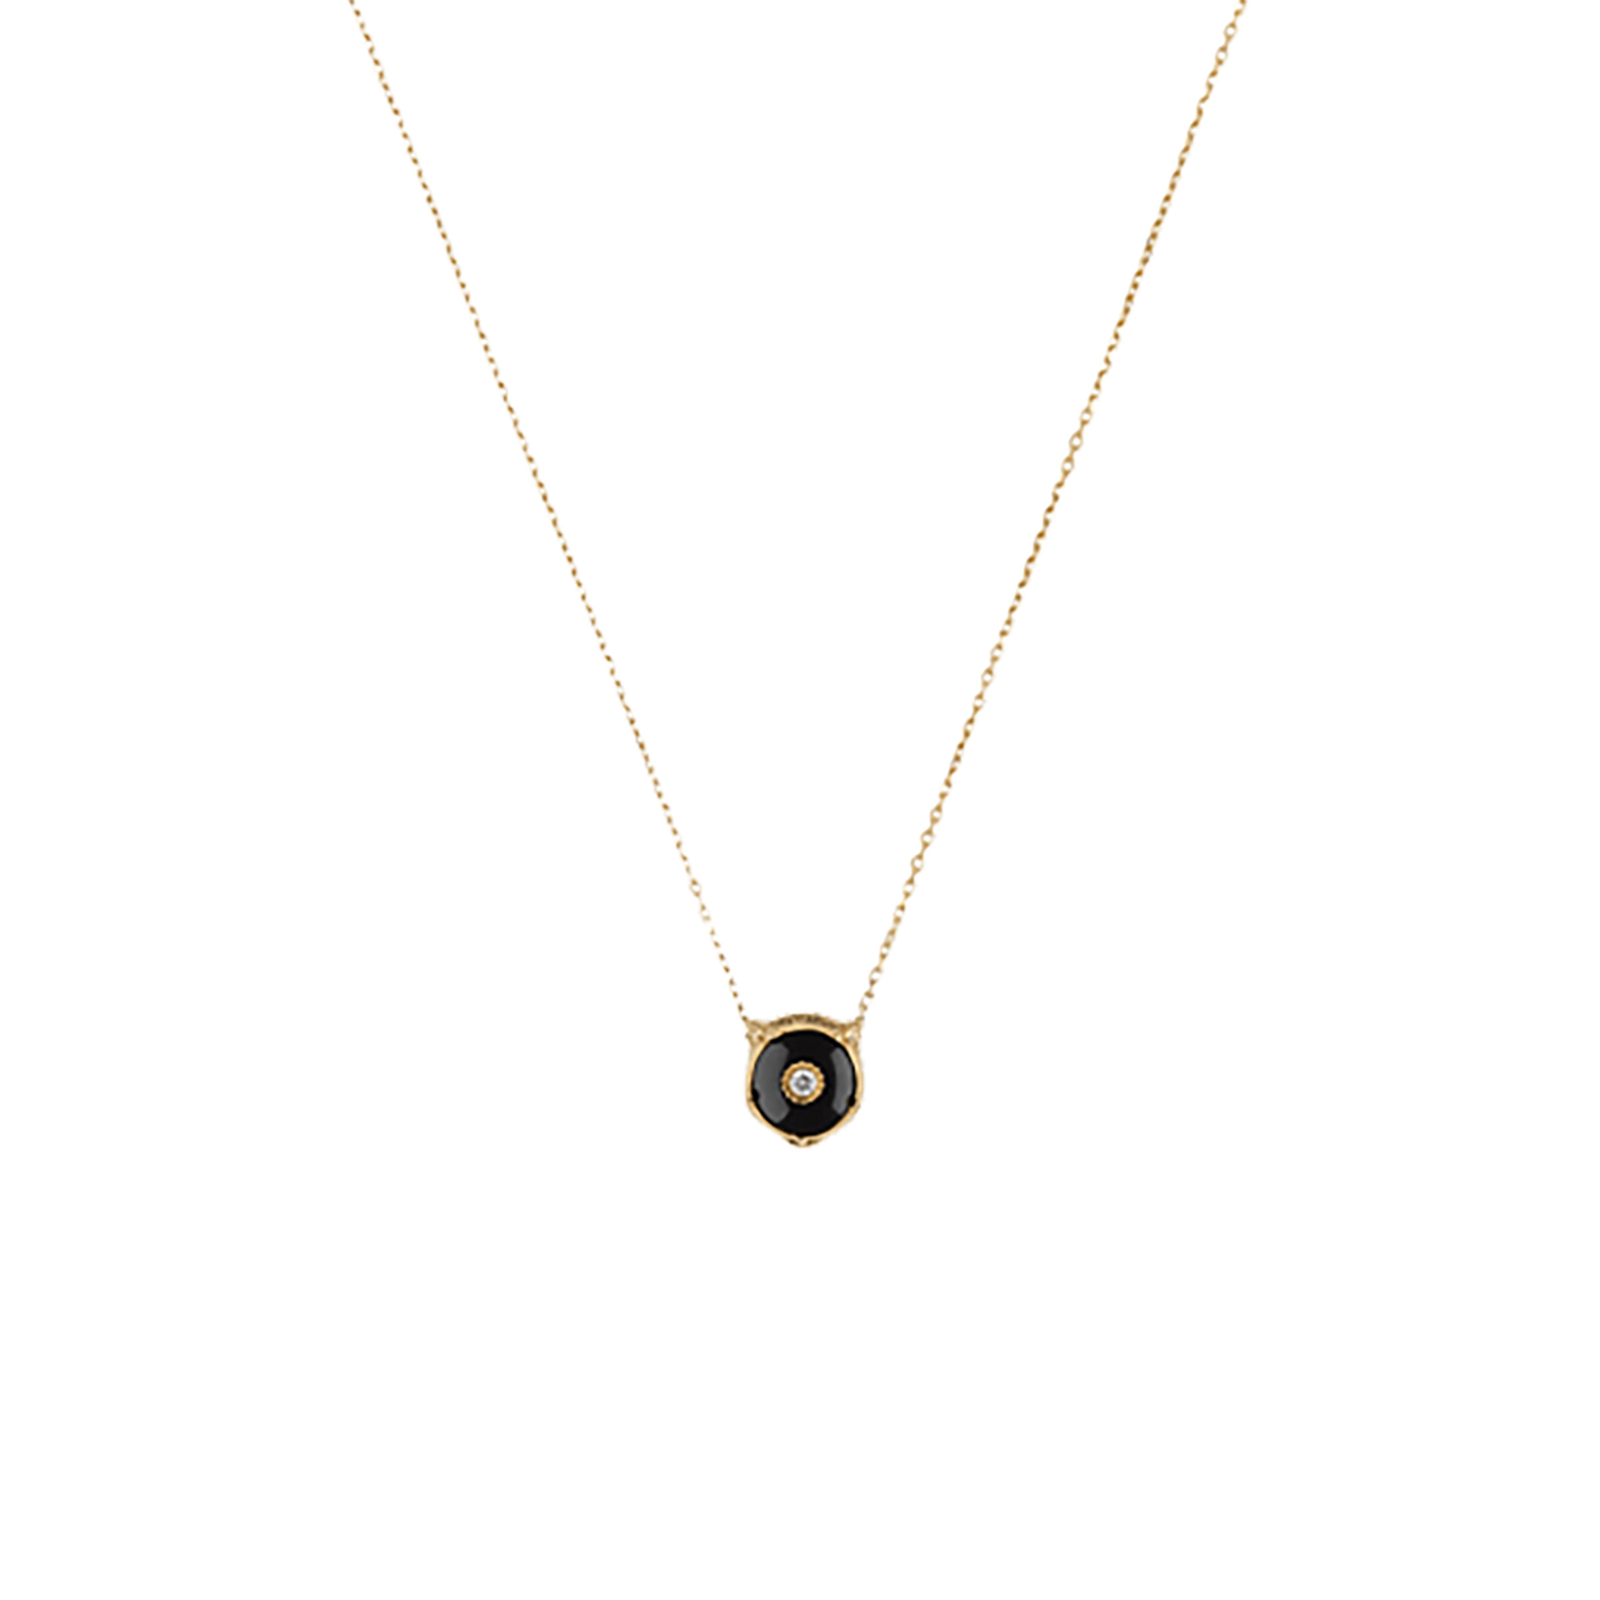 Gucci 18ct Yellow Gold Onyx & Diamond Feline Necklace | Necklaces ...